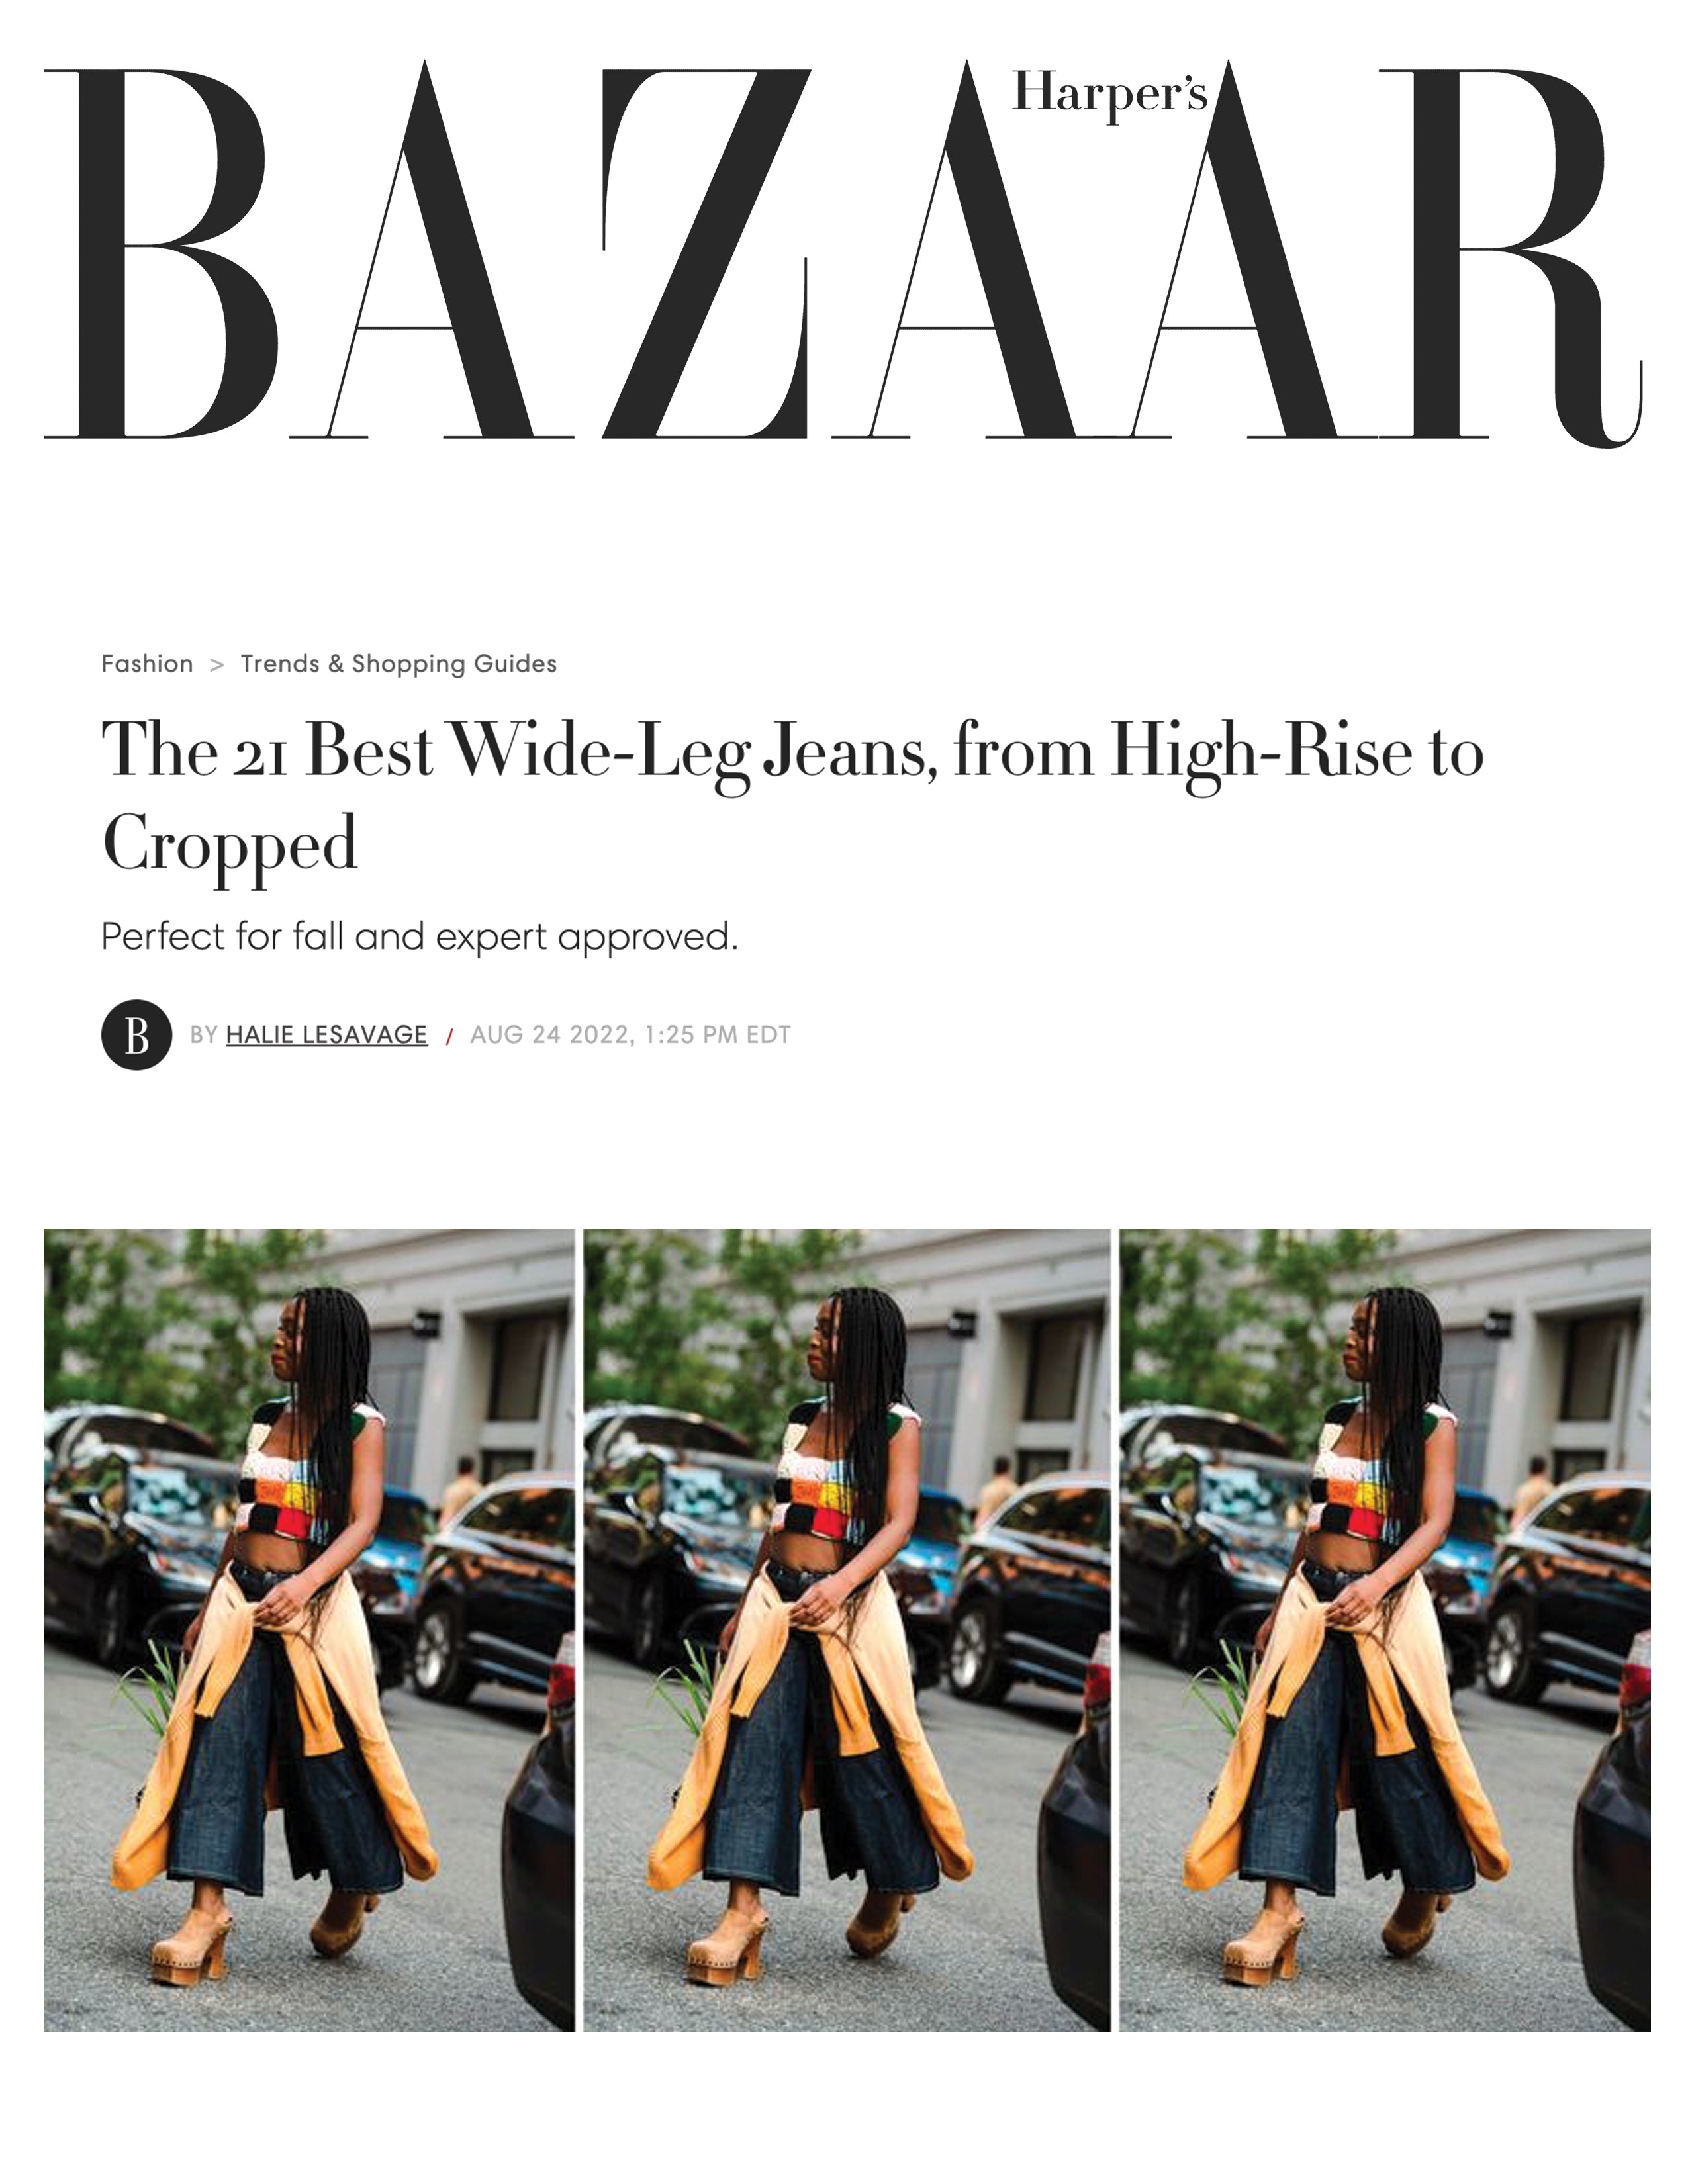 HARPER'S BAZAAR | The 21 Best Wide-Leg Jeans, from High-Rise to Cropped